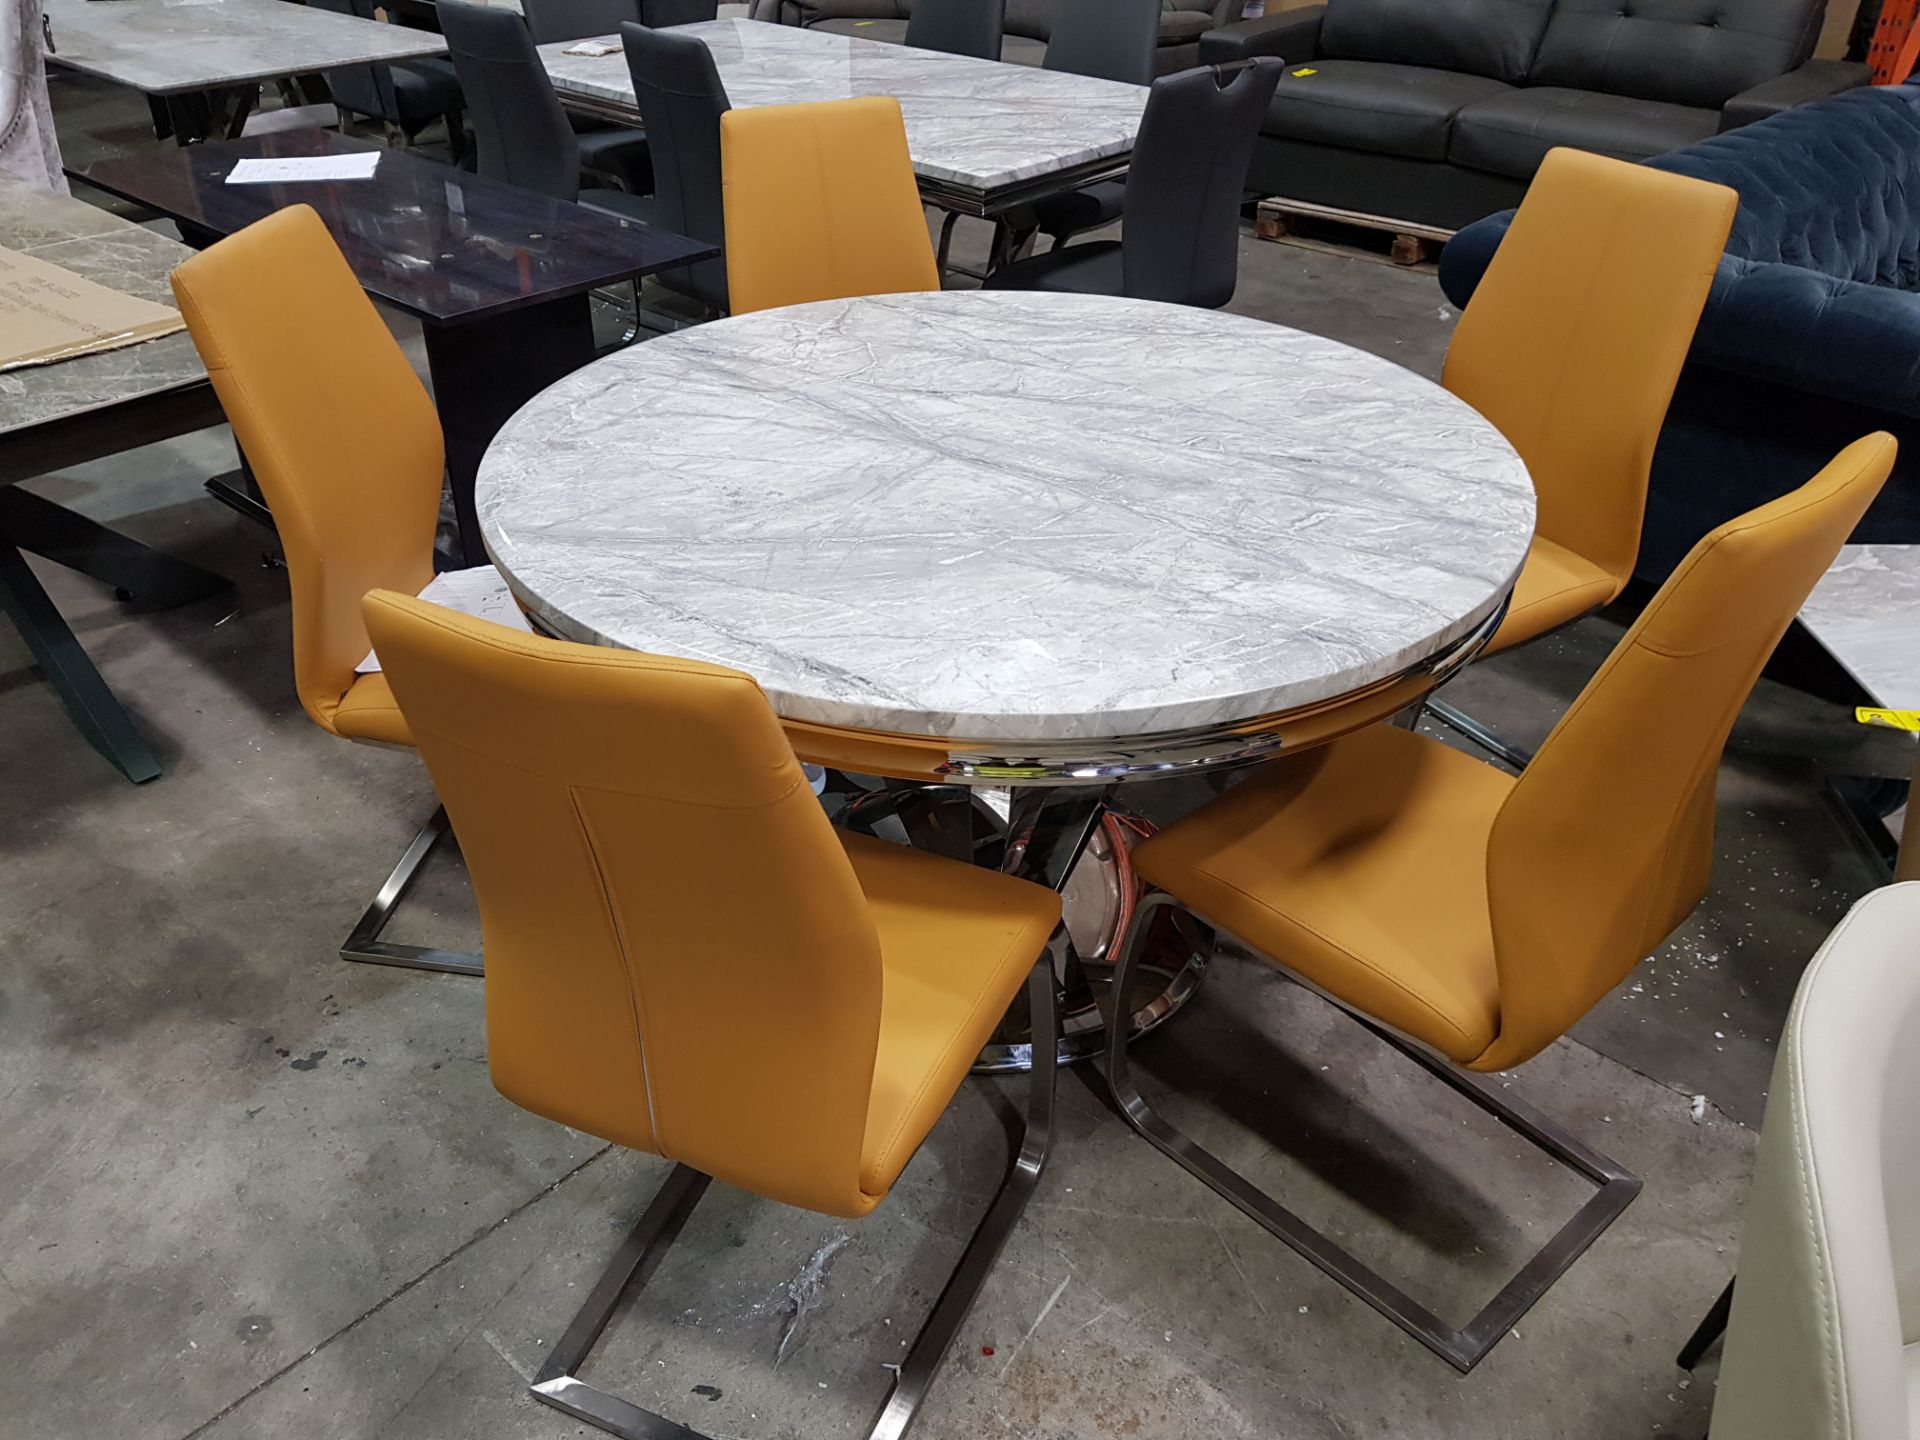 1 X GRANITE TOP ARTURO DINING TABLE IN GREY (DIAMETER 1300mm) WITH 5 X DINING LEATHER CHAIRS (PLEASE